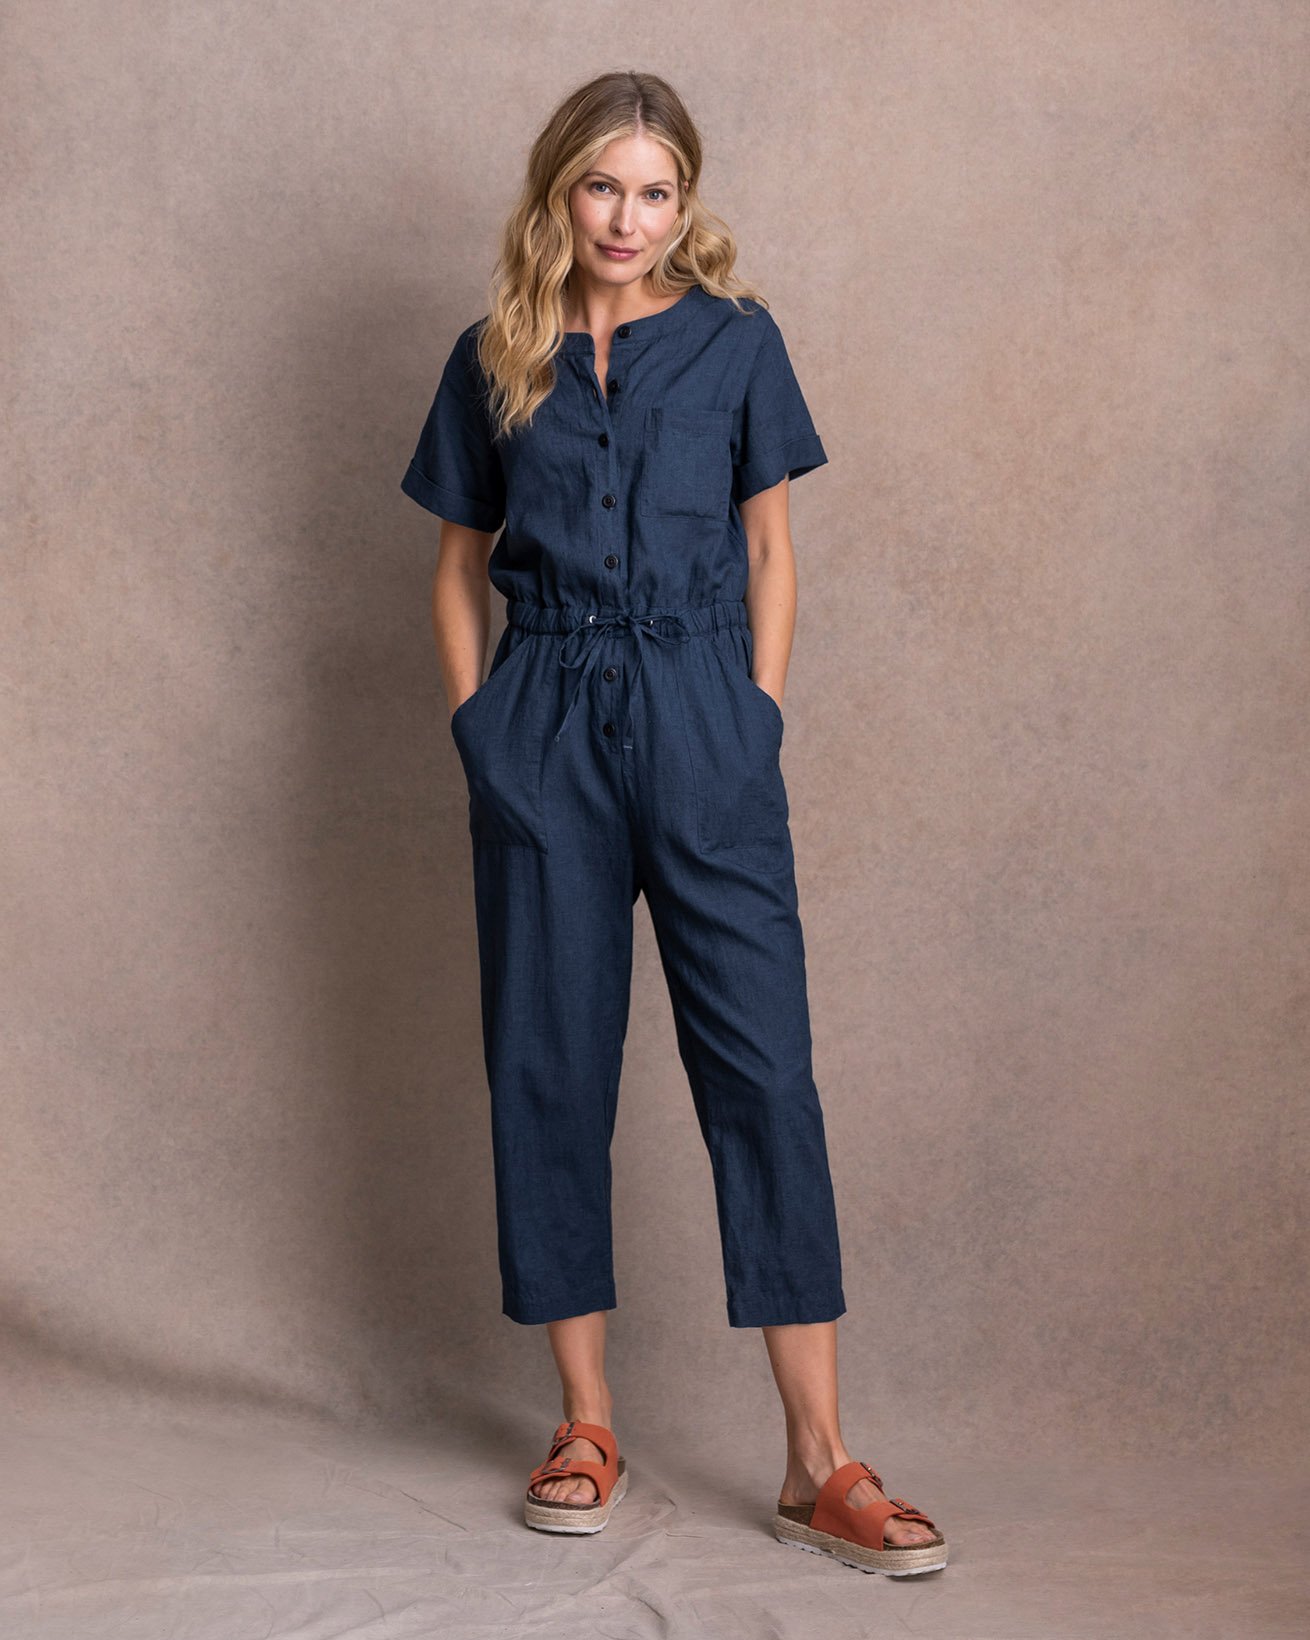 Top more than 176 jumpsuit next day delivery super hot